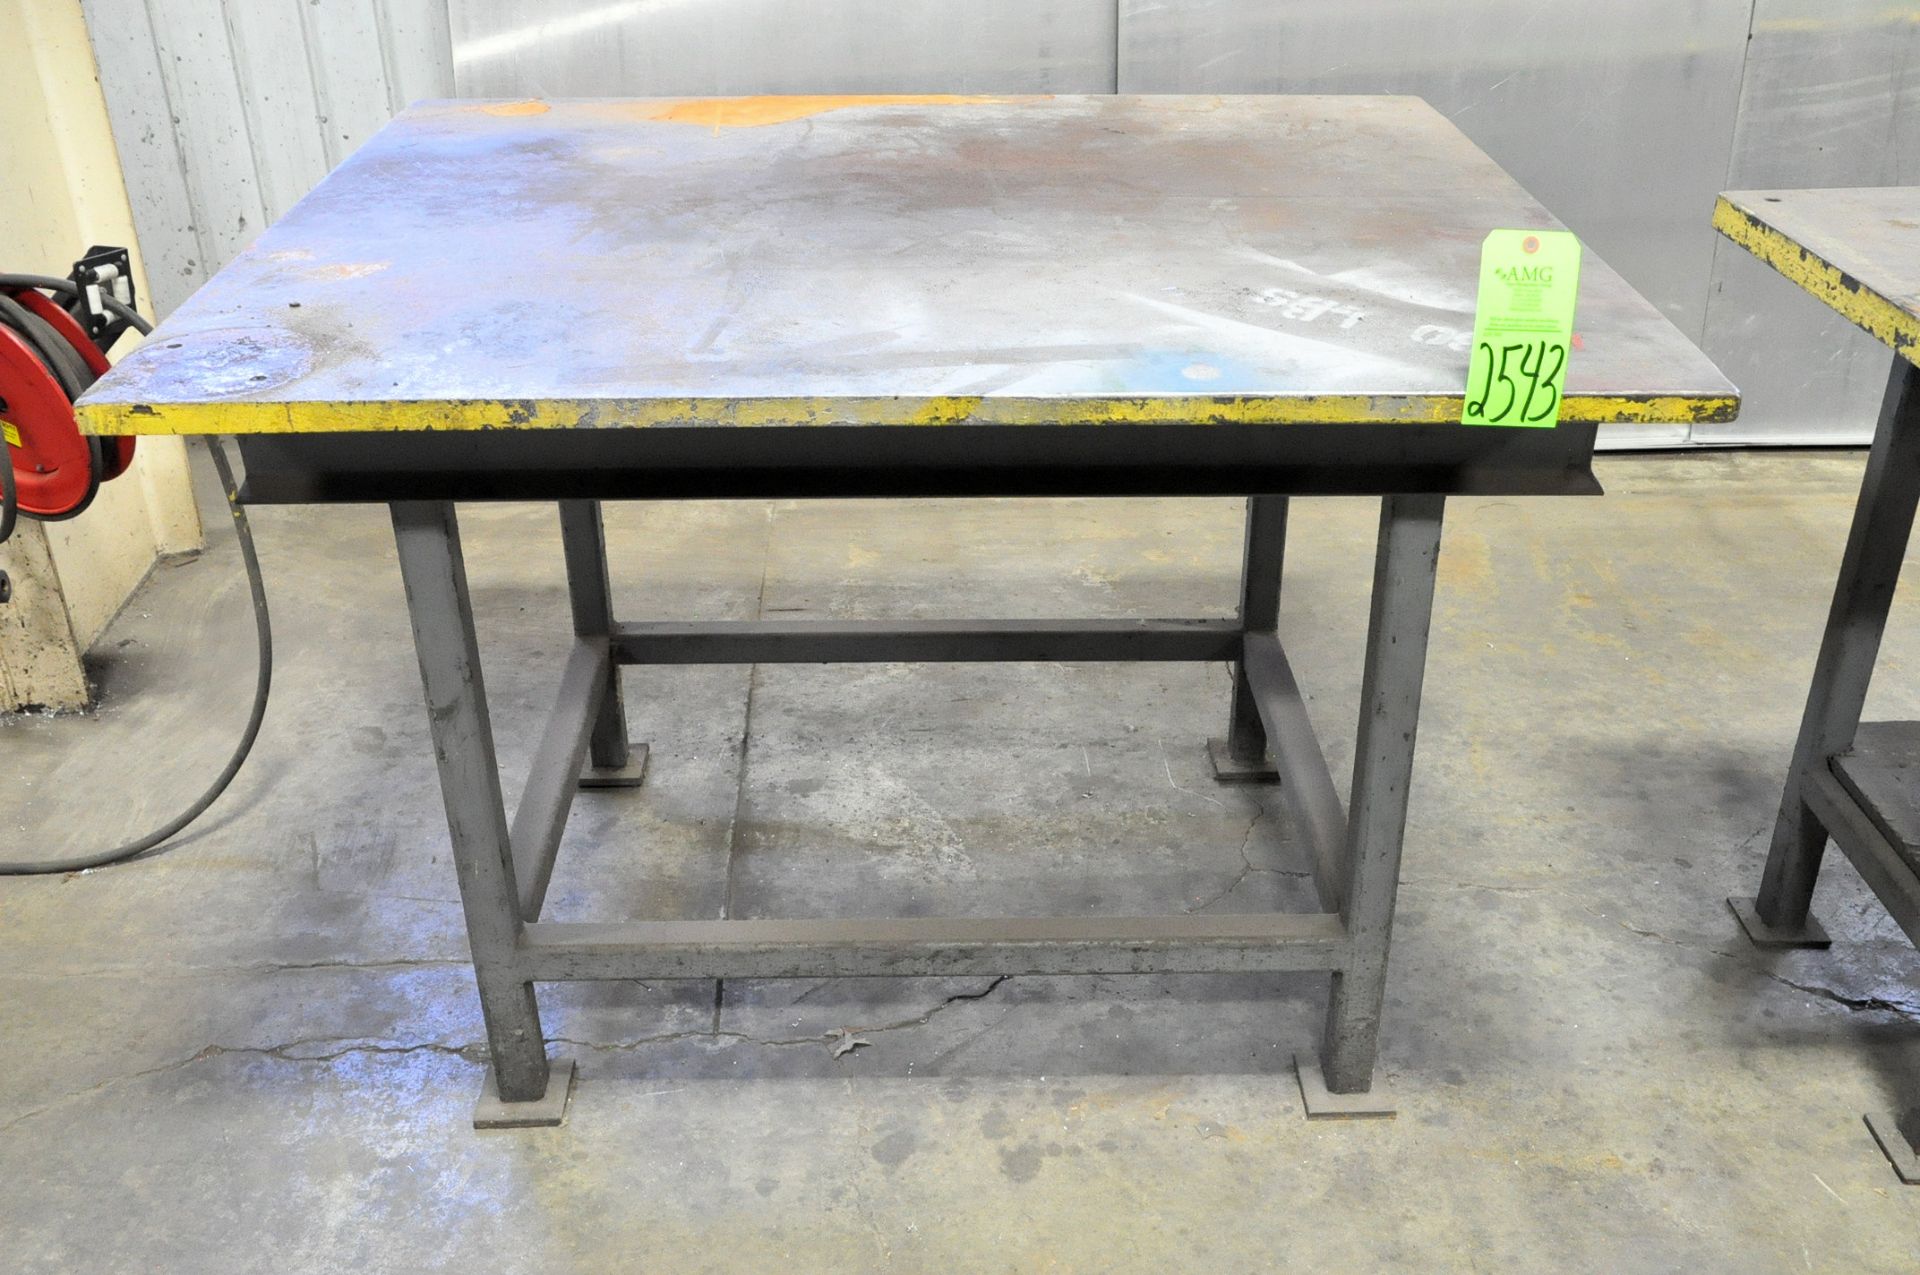 4" x 54" x 1" Steel Layout Table, (Laser Building), (Green Tag)